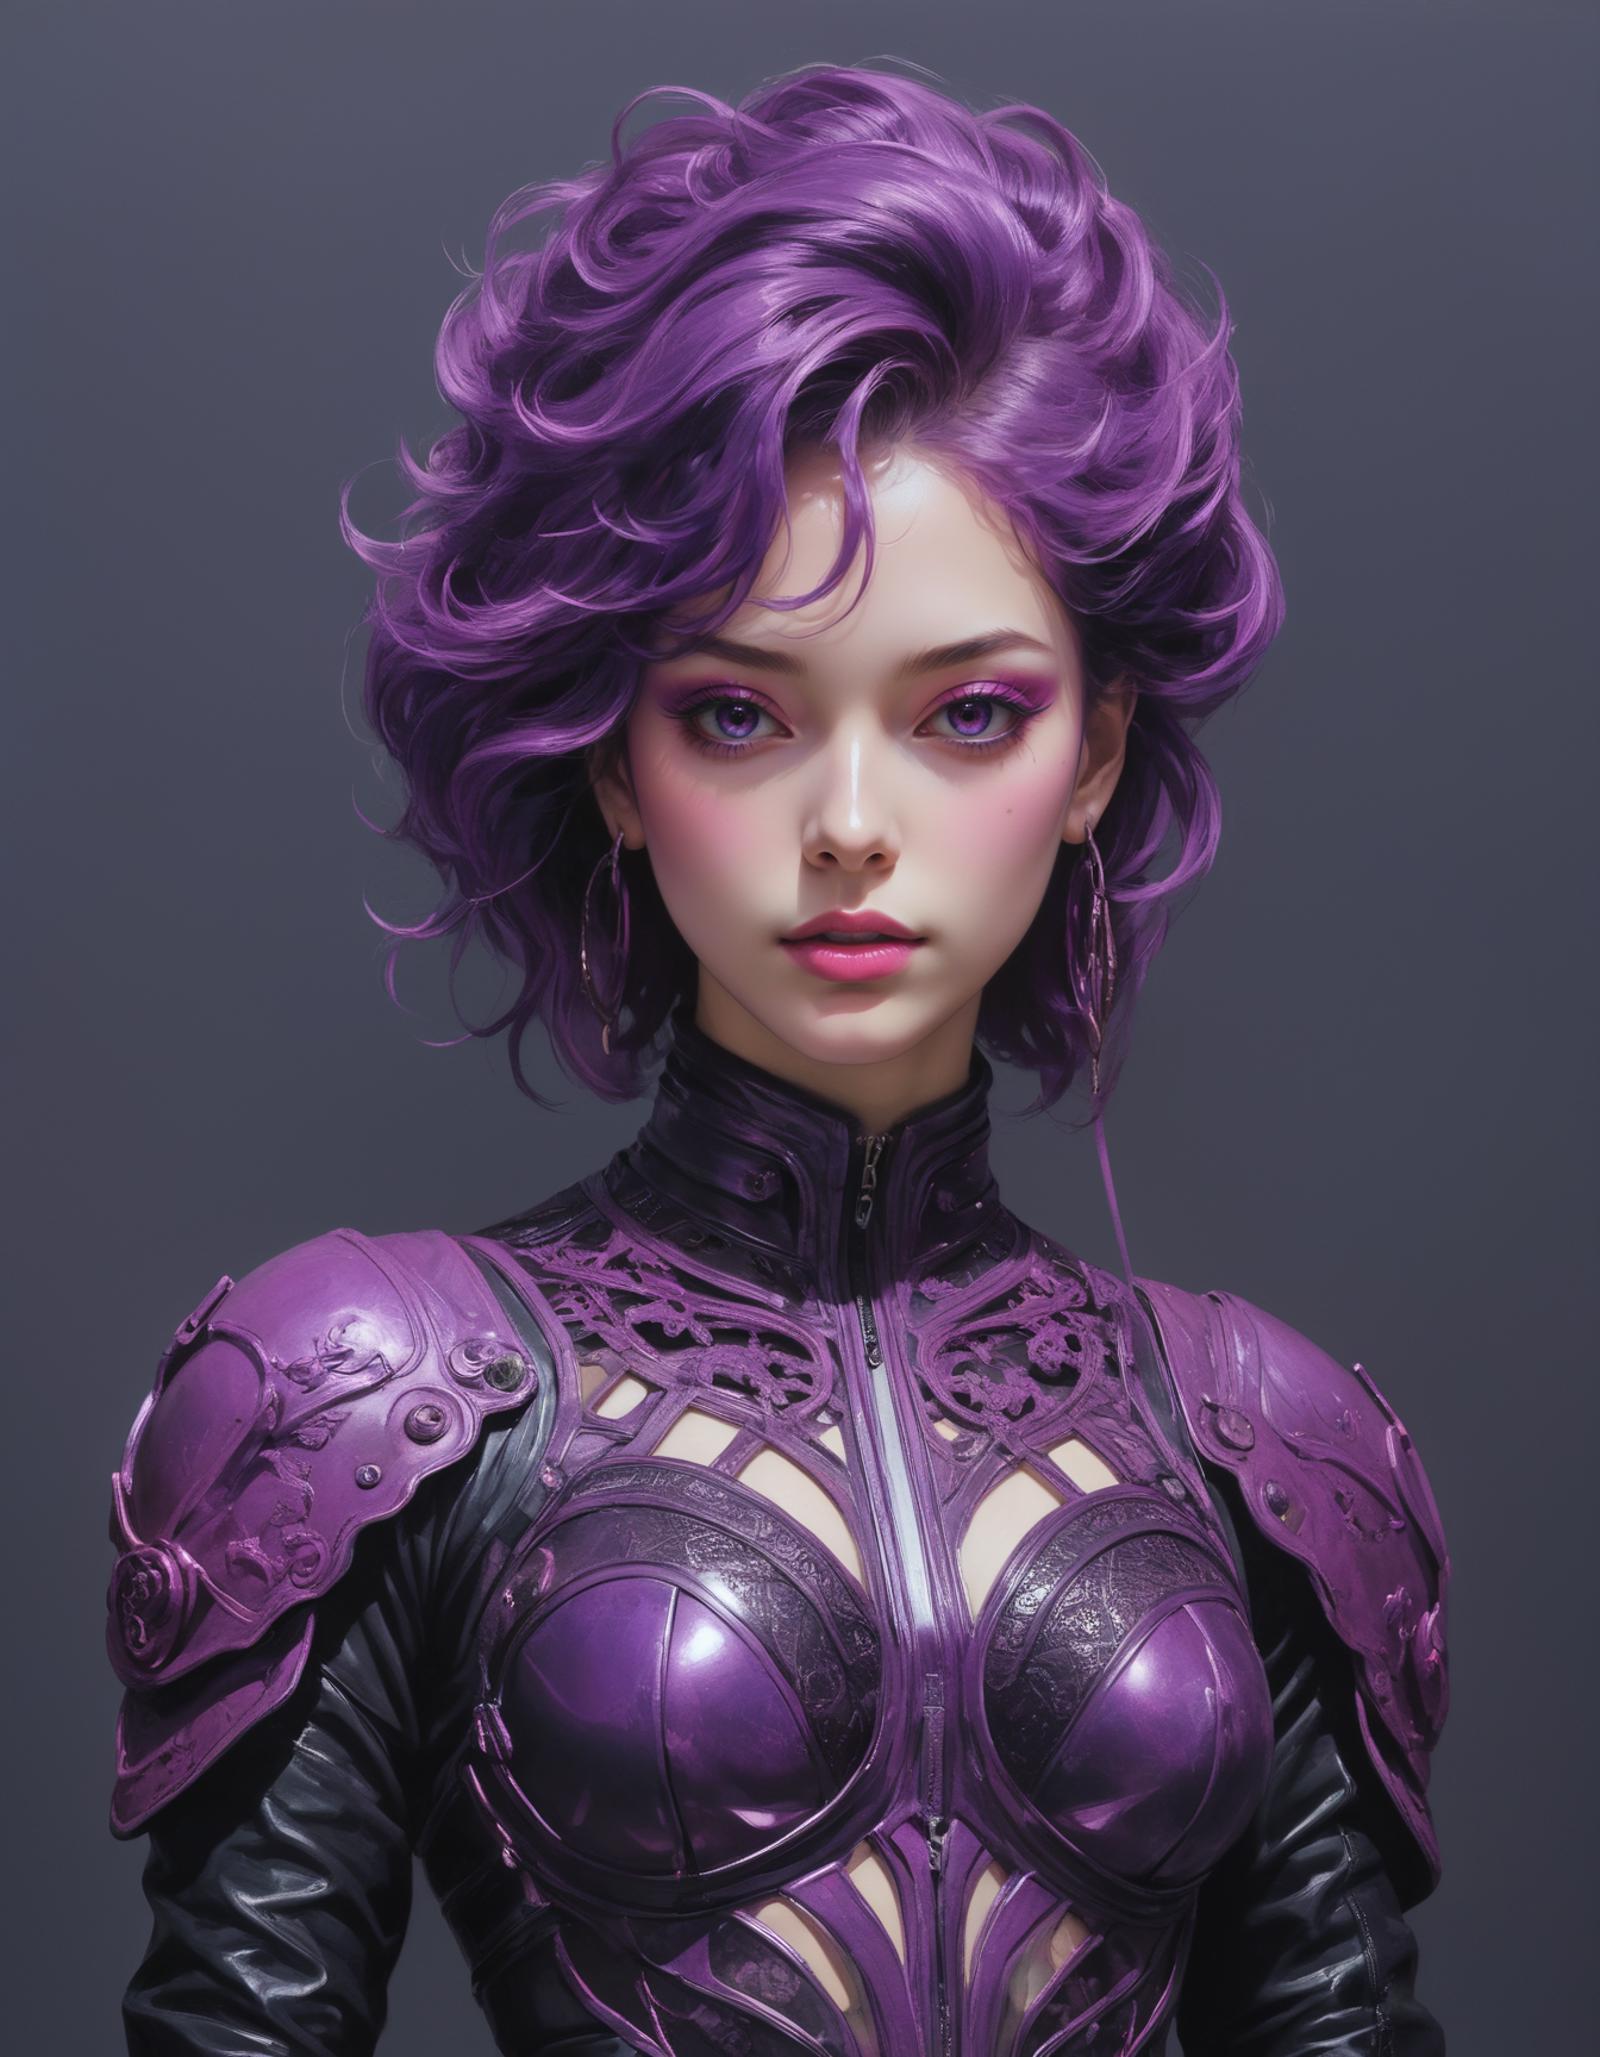 A purple-haired woman in a futuristic purple armor outfit.